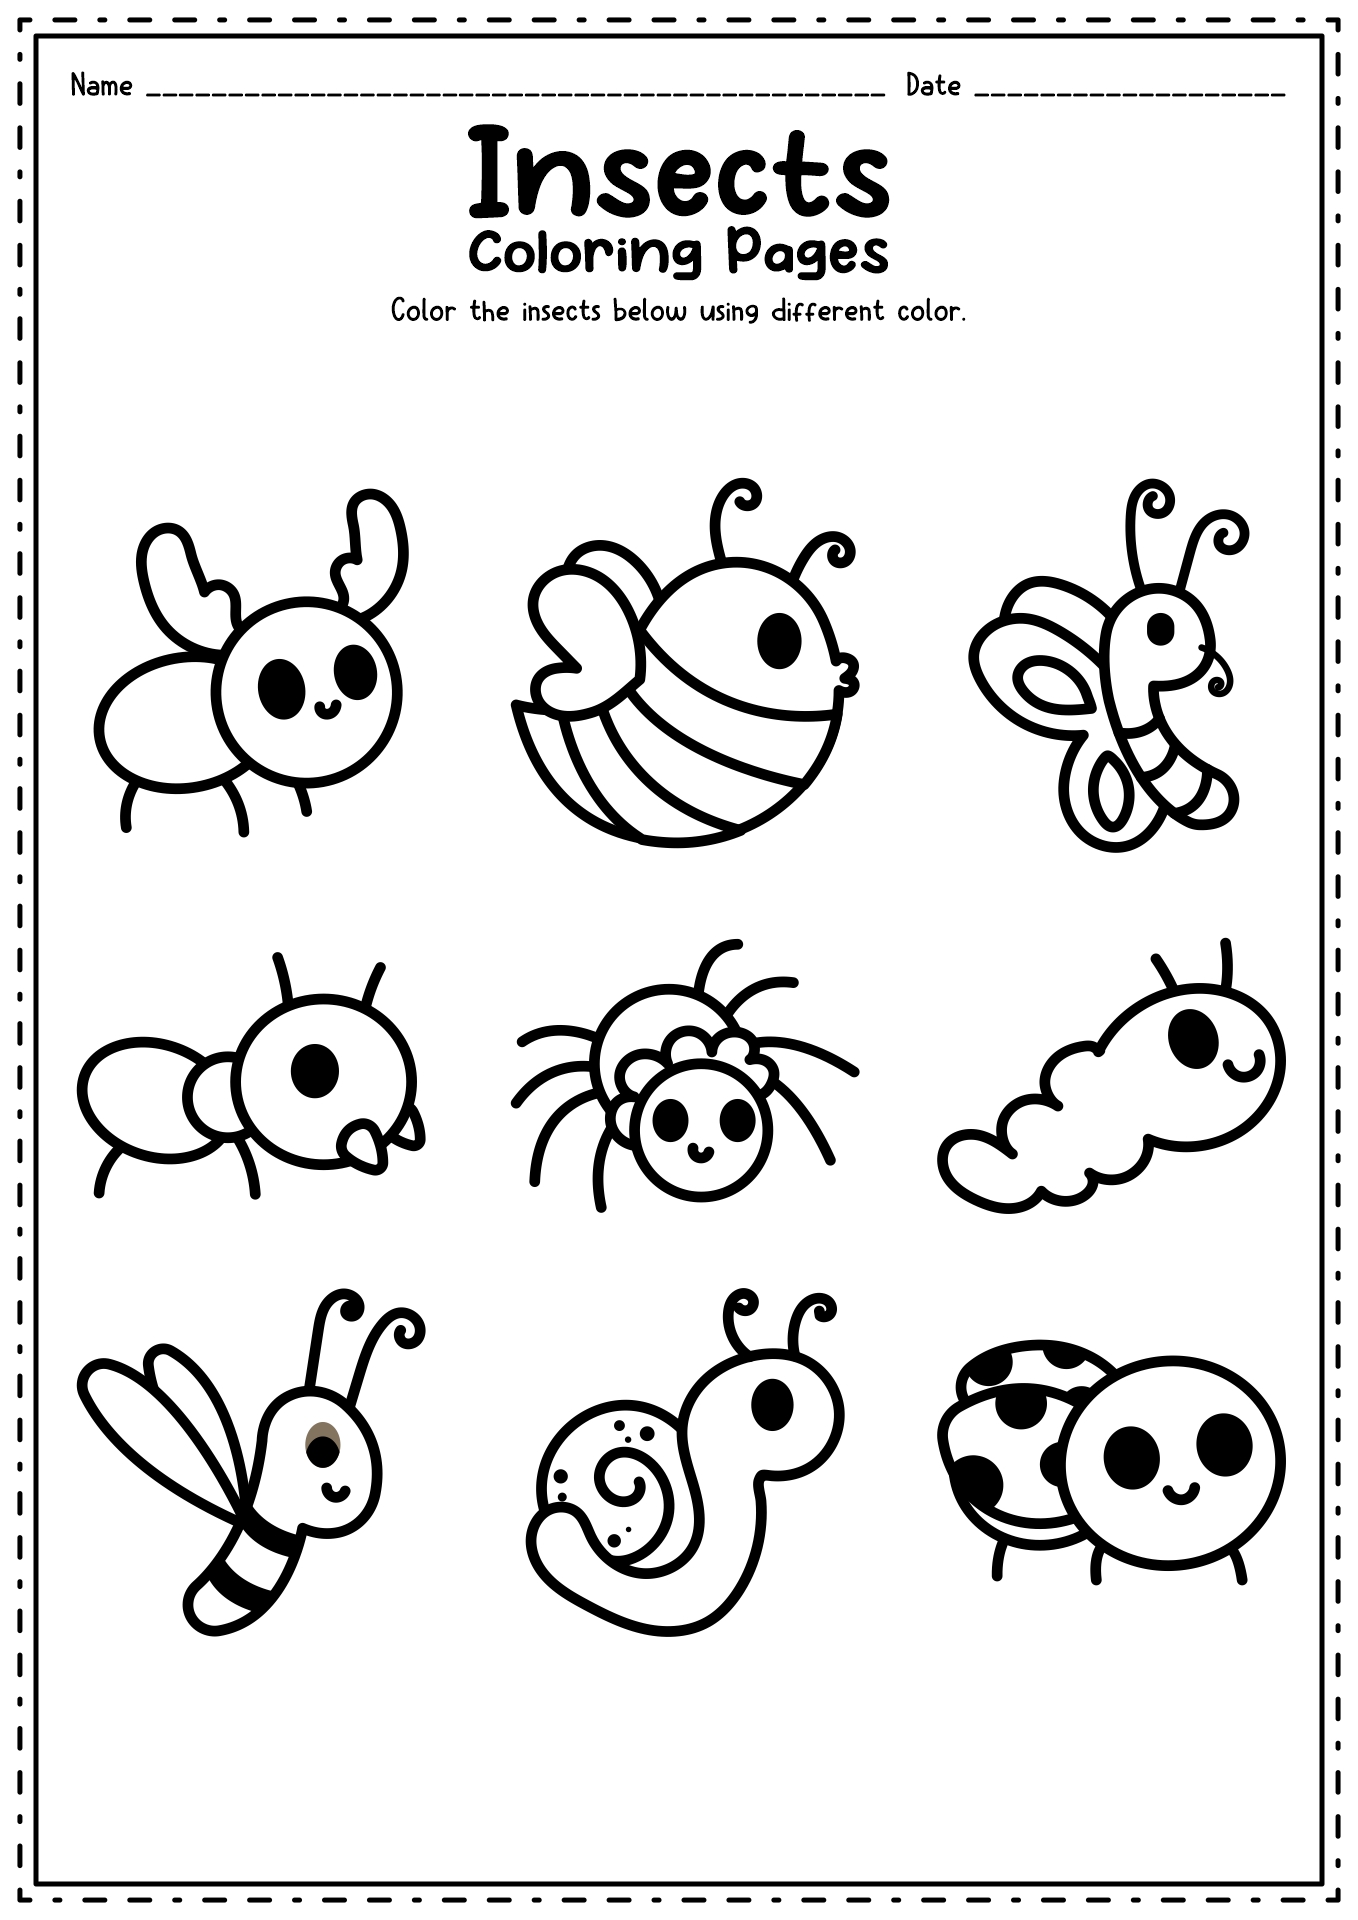 7 Best Images of Kids Bug And Insects Worksheets Insect for Kids to